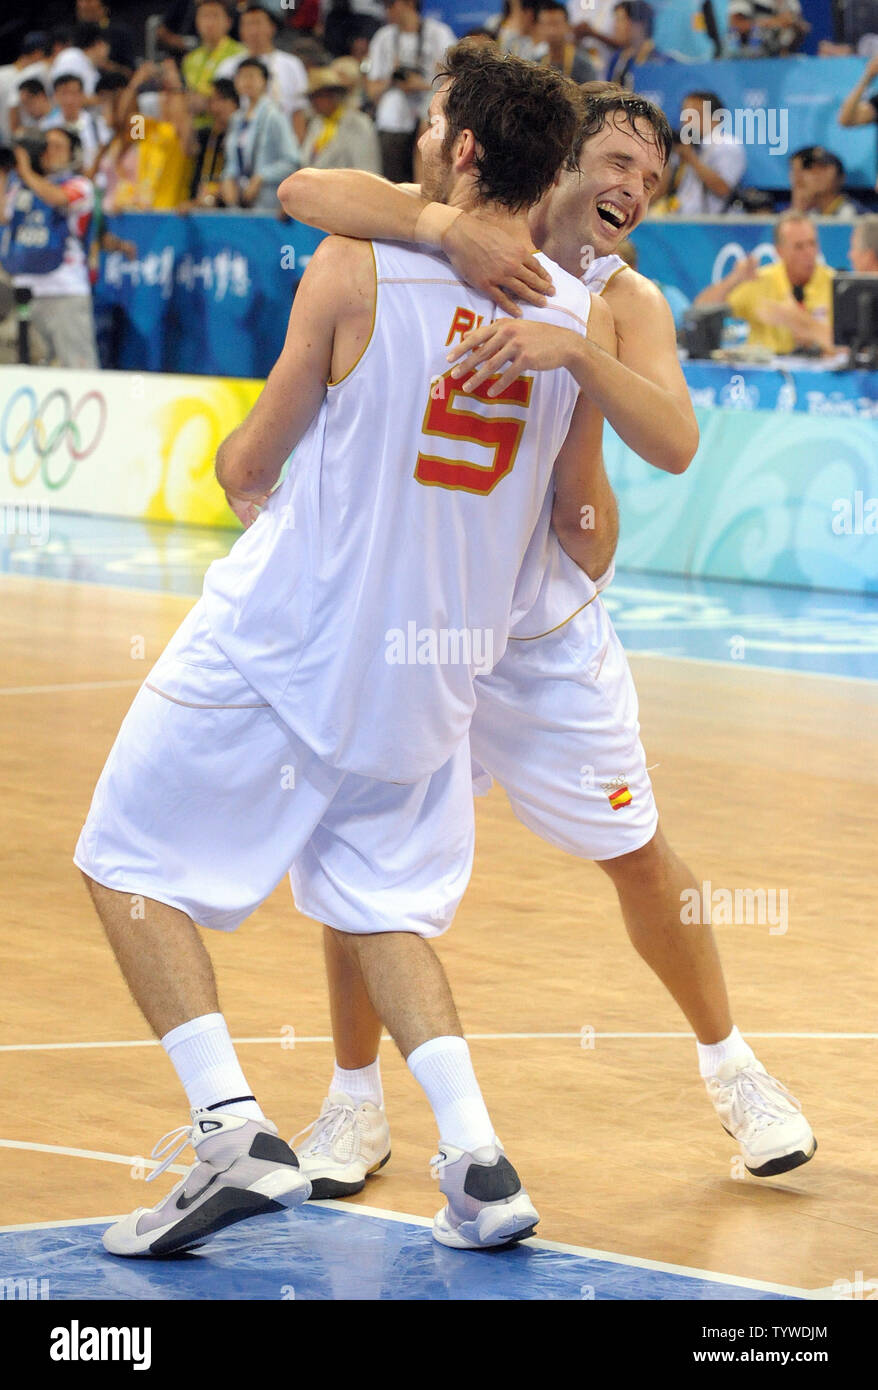 Spain's Rudy Fernandez (L) and Spain's Raul Lopez celebrate after defeating  Lithuania in their seminfinal Men's Basketball game during the 2008 Summer  Olympics in Beijing on August 22, 2008. Spain won 91-86. (